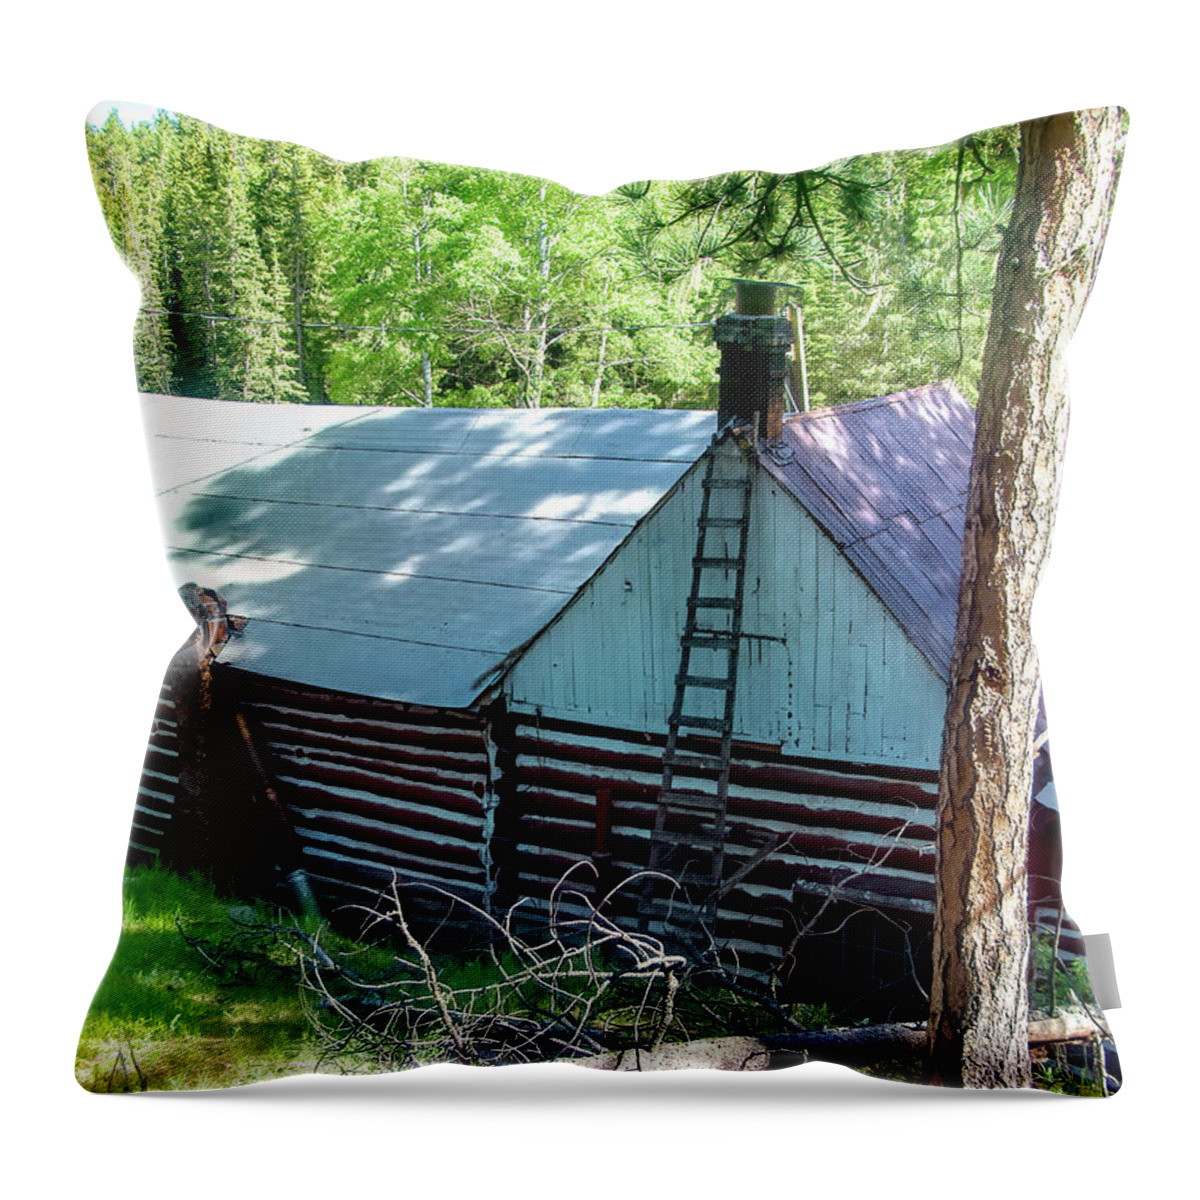 Barn Throw Pillow featuring the photograph Old Black Hills Cabin by Cathy Anderson